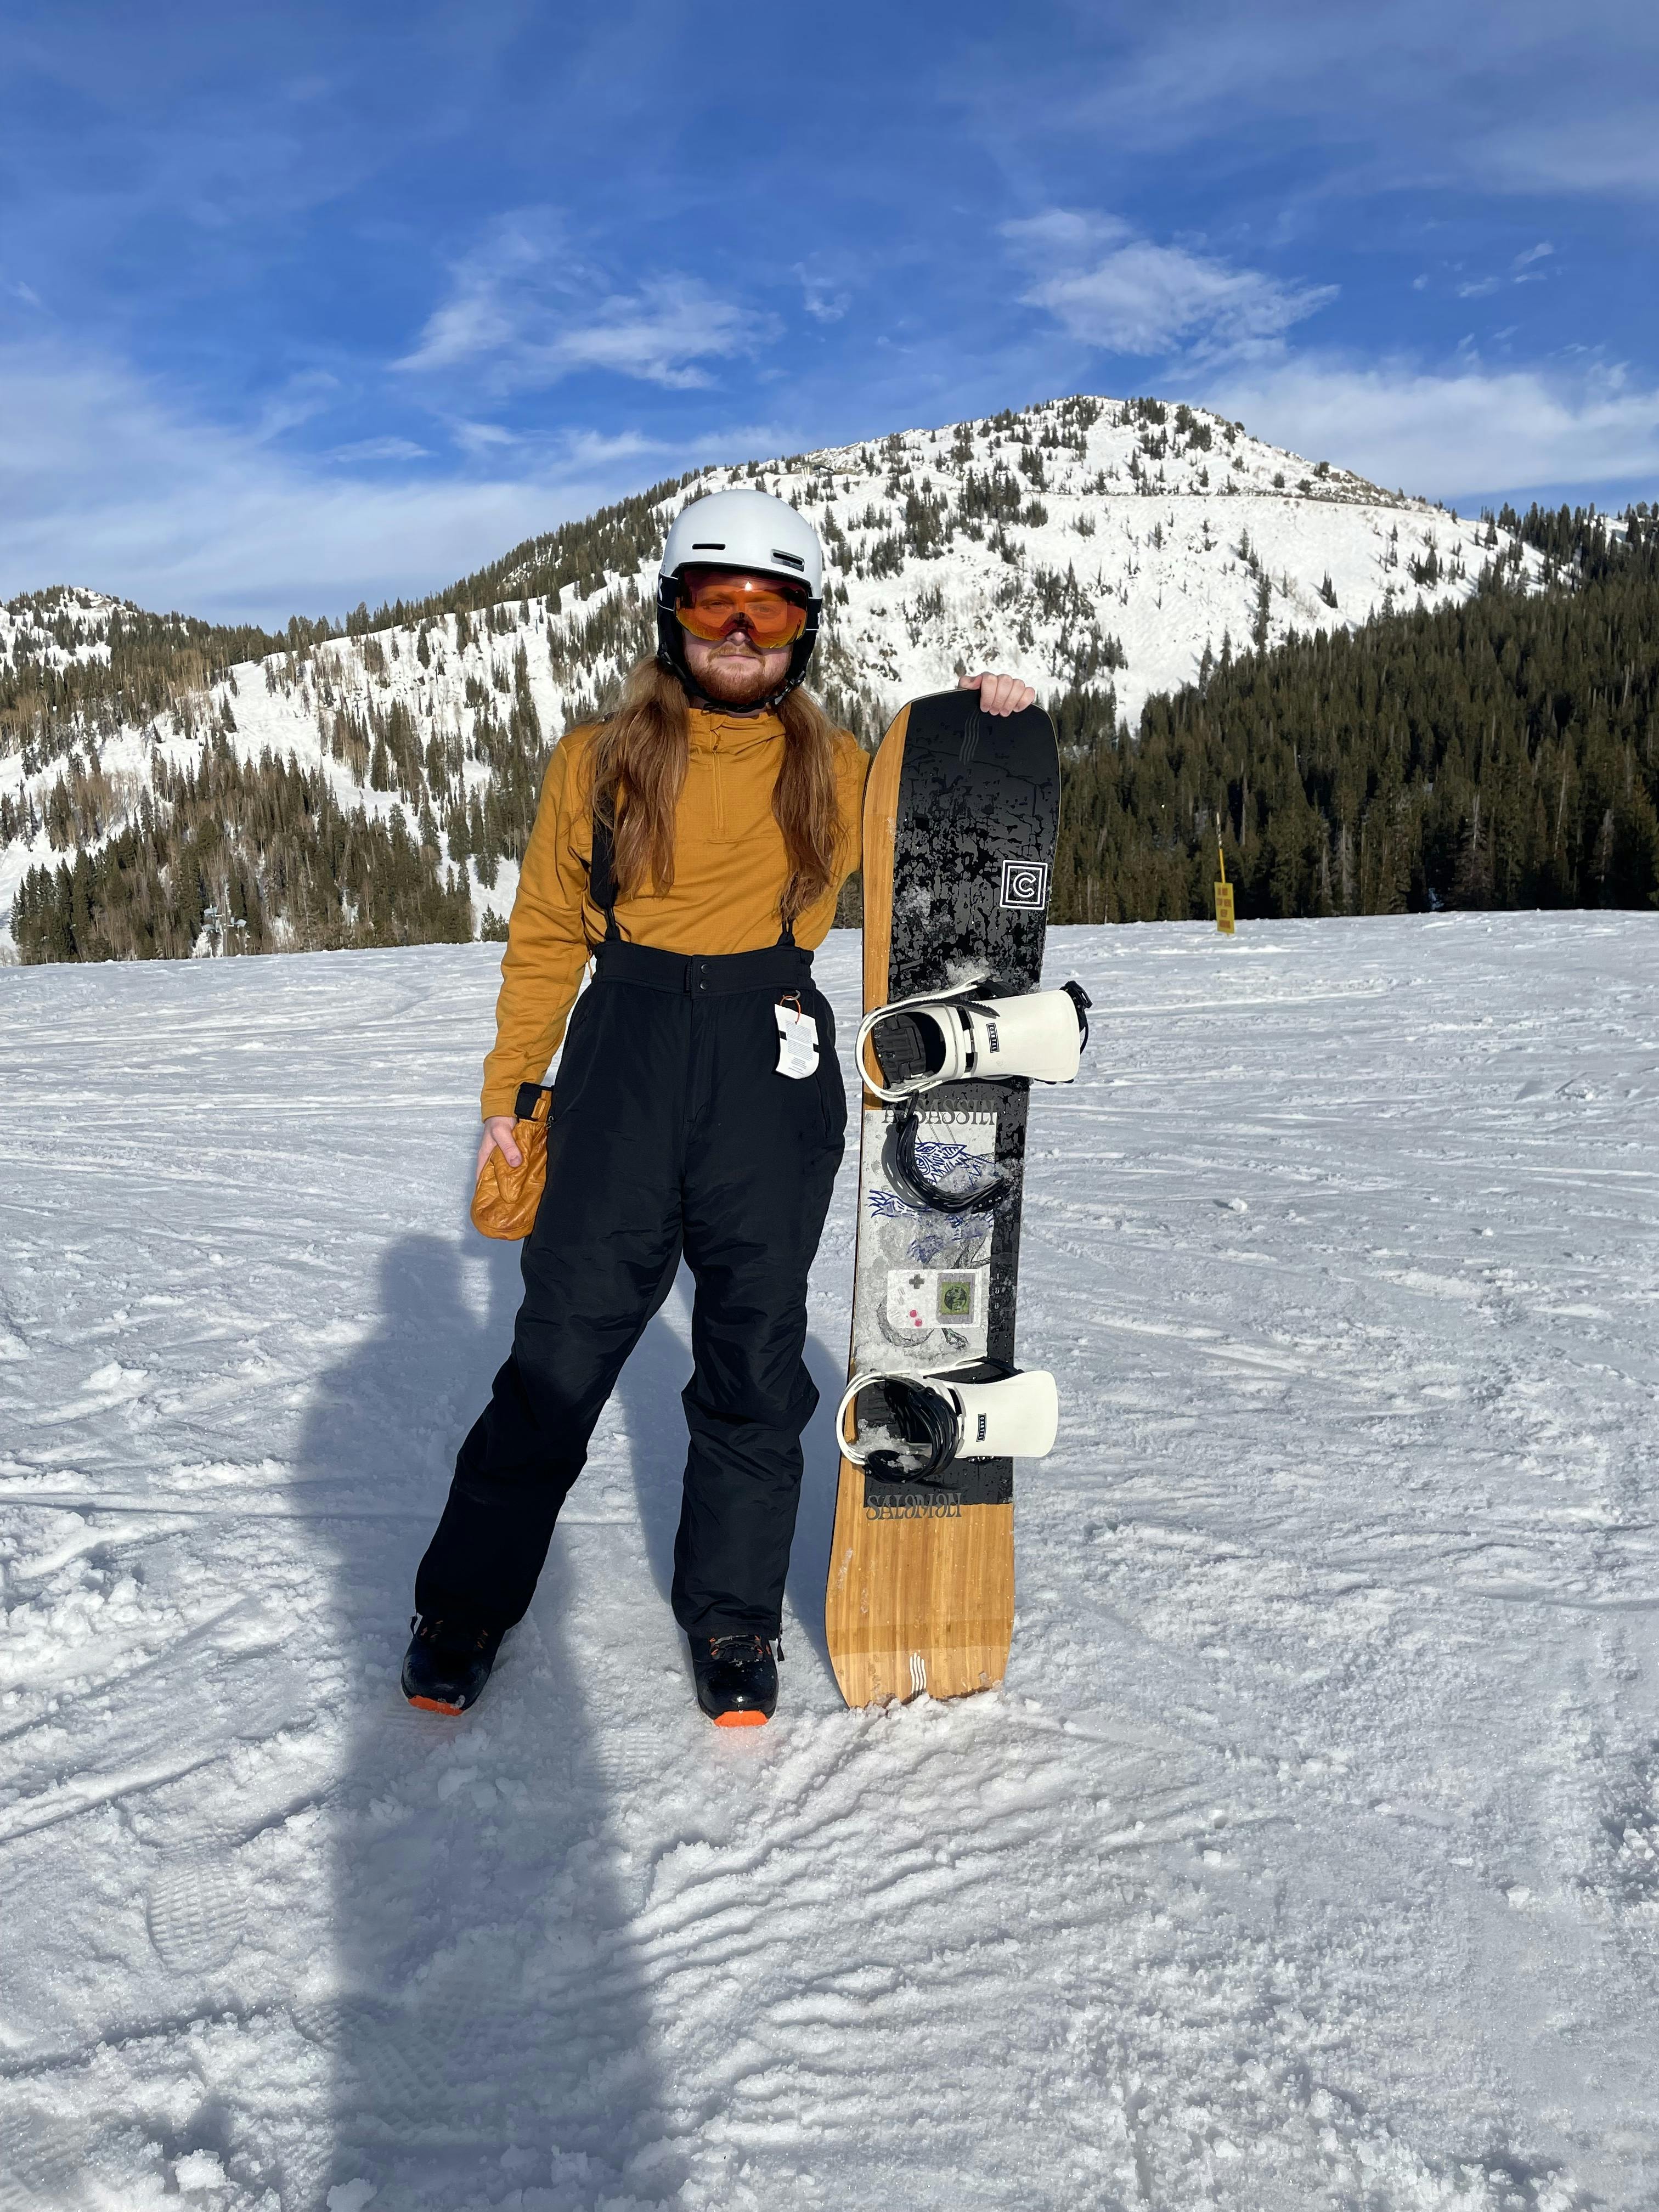 A man posing with the Salomon Assassin Snowboard · 2022. He is standing at a ski area and there are snowy mountains visible in the distance. 